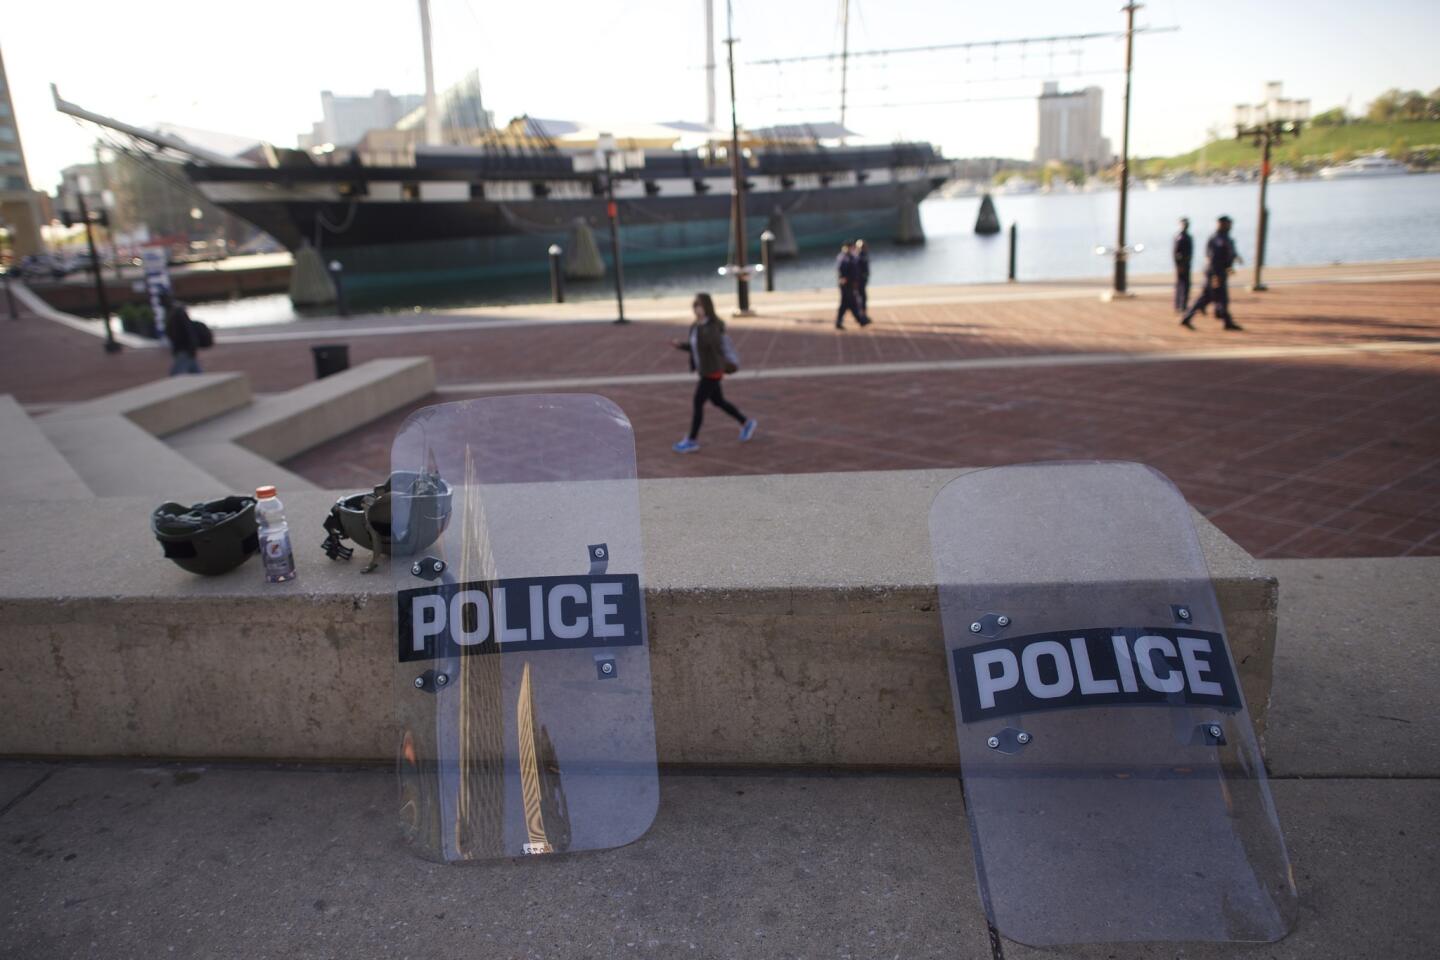 Tensions In Baltimore Continue To Simmer After Days Of Riots And Protests Over Death Of Freddie Gray